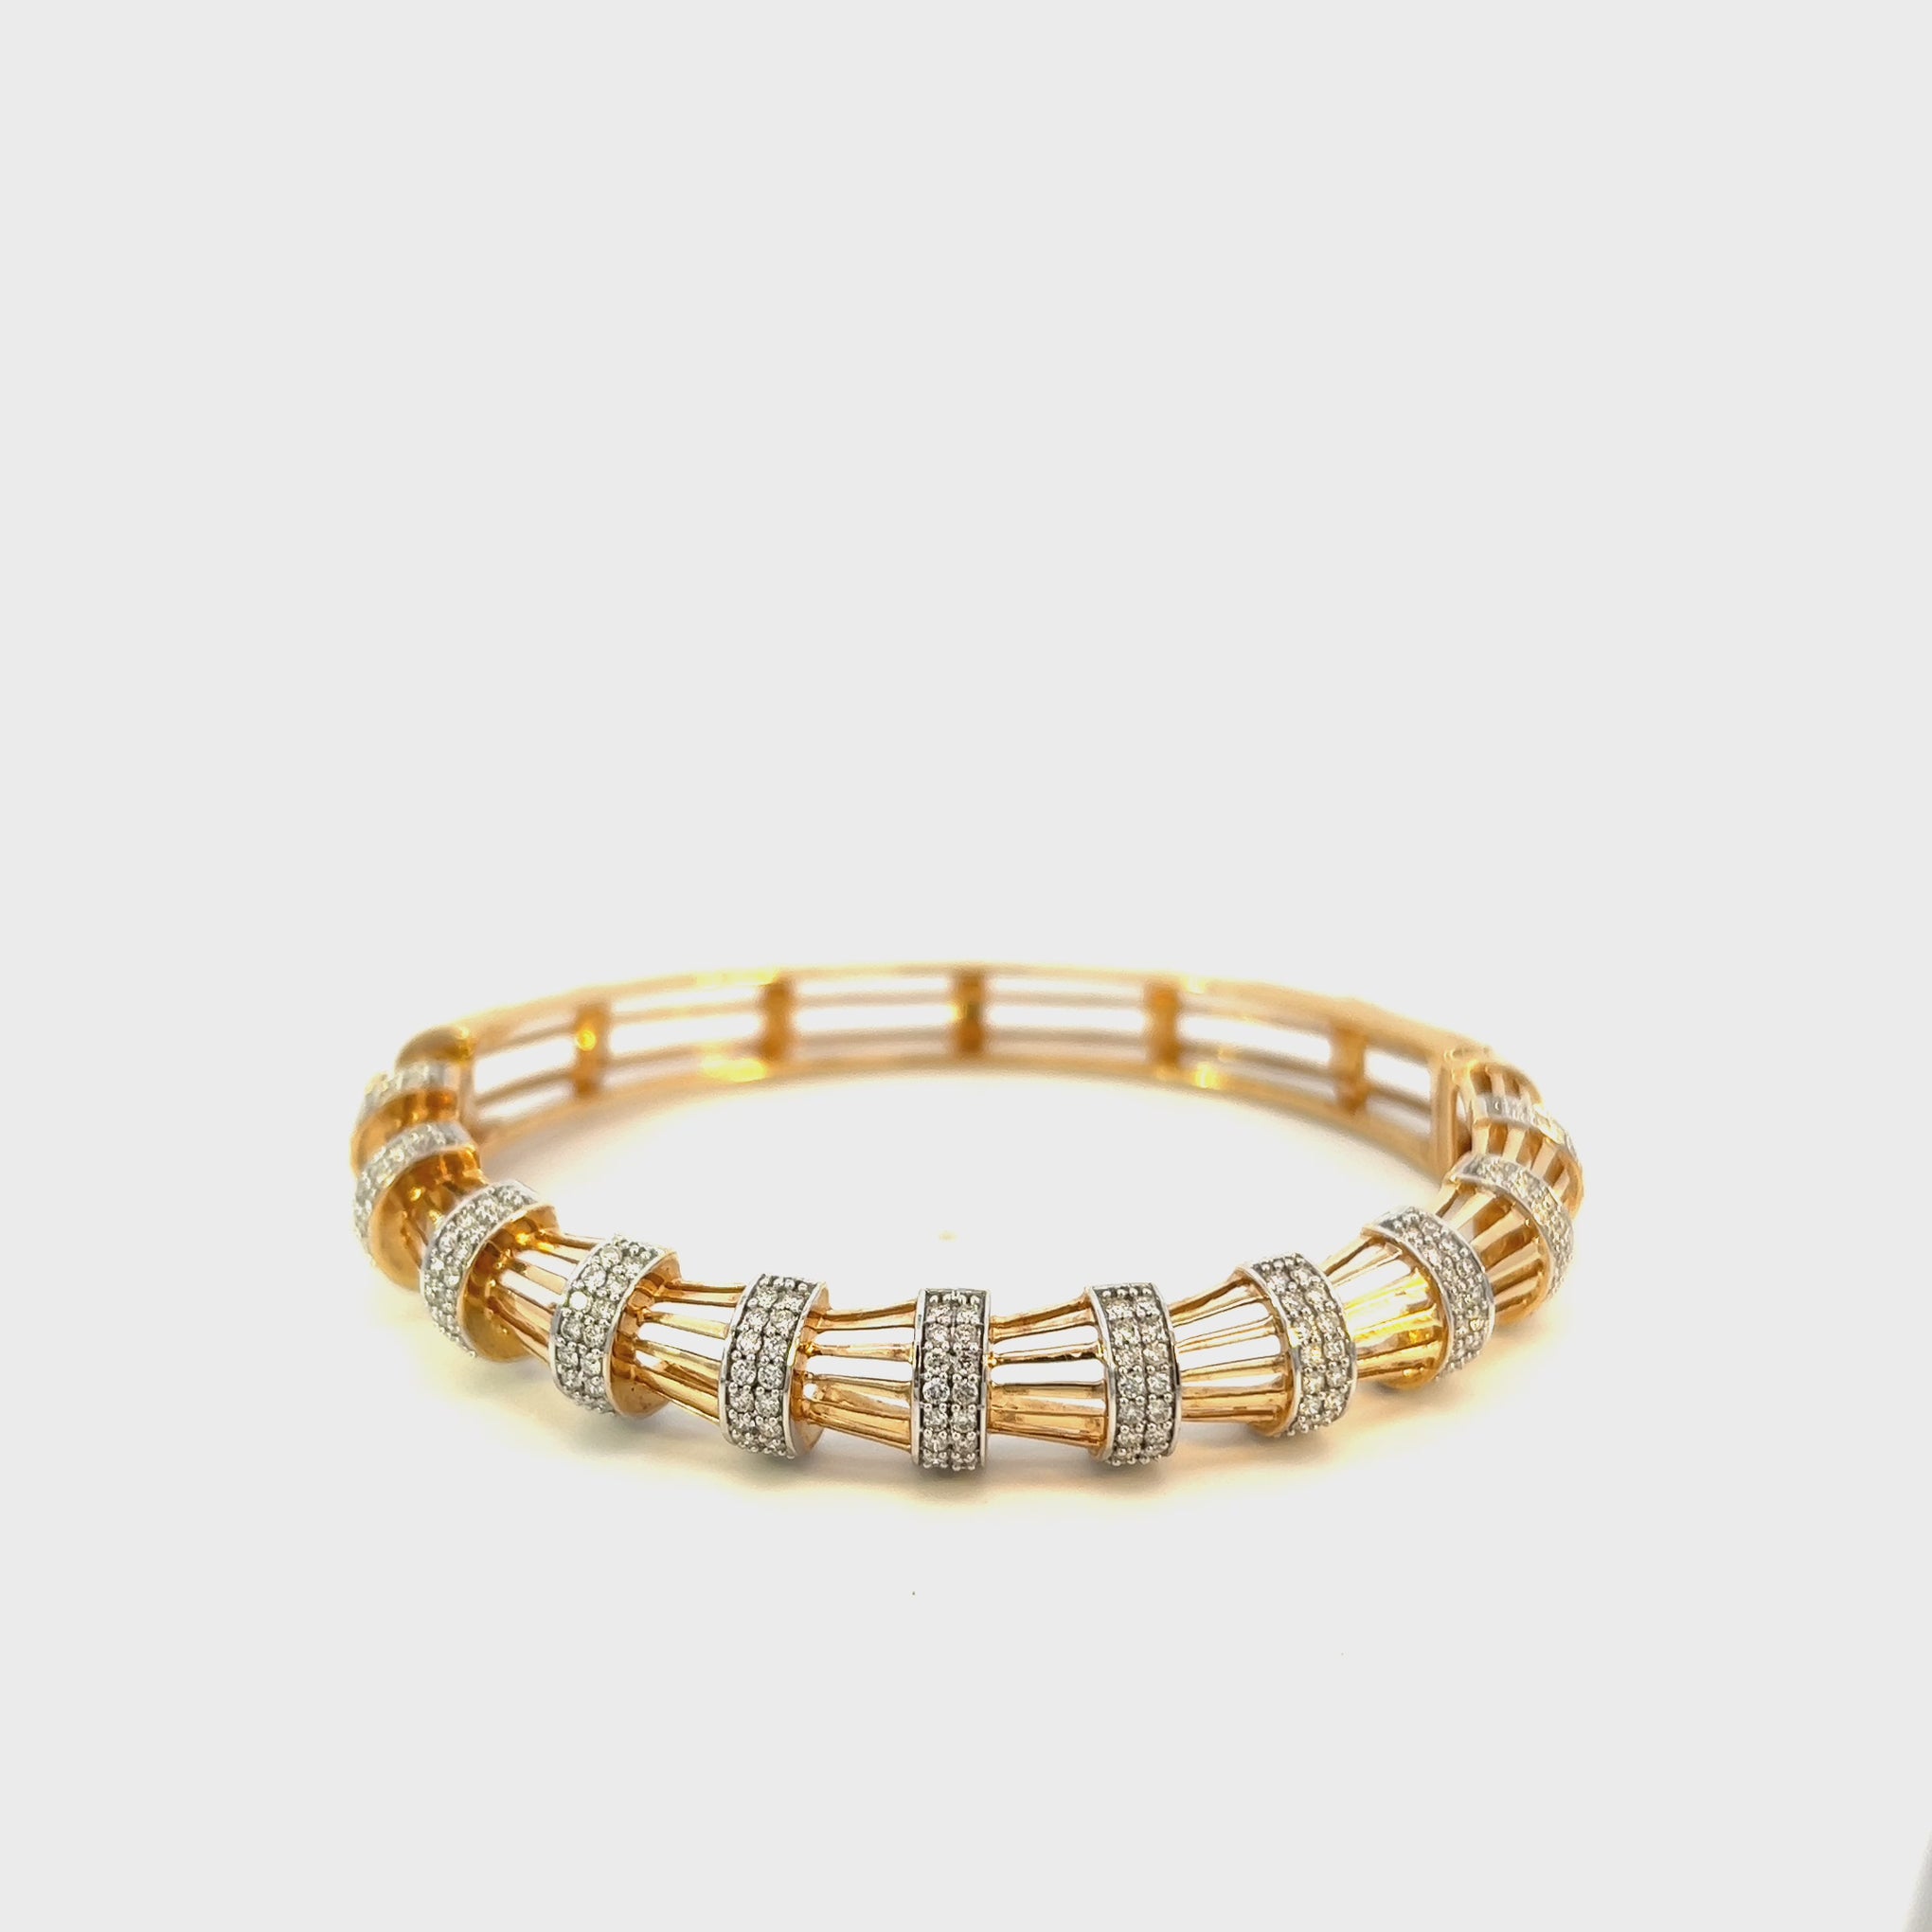 14KT Yellow Gold With Round Cut Diamonds Fluted Design Bangle